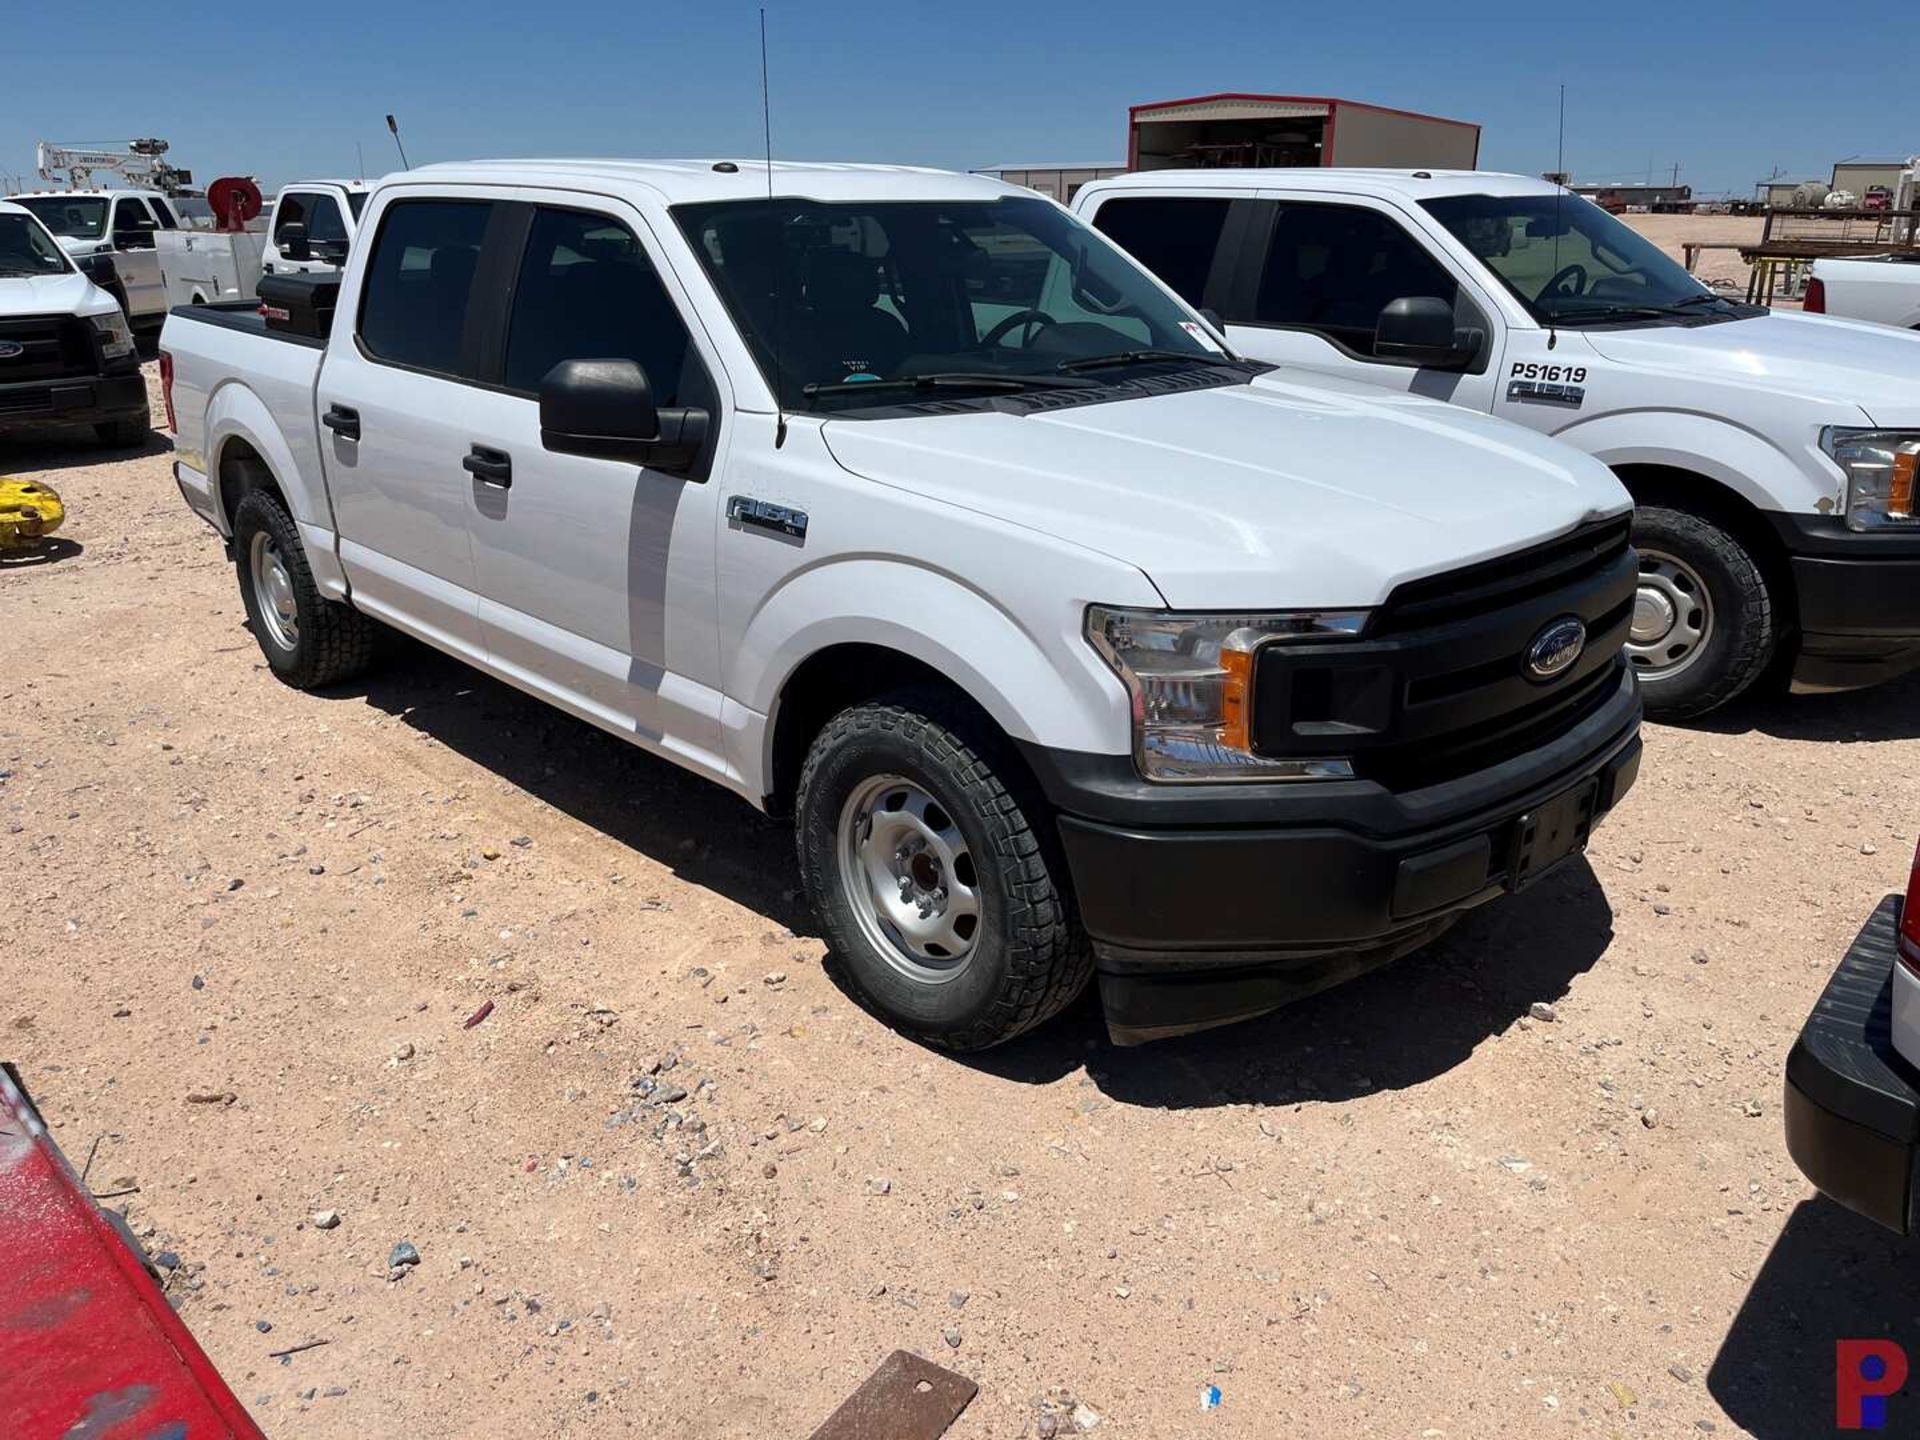 2019 FORD F-150 CREW CAB PICKUP TRUCK - Image 2 of 7